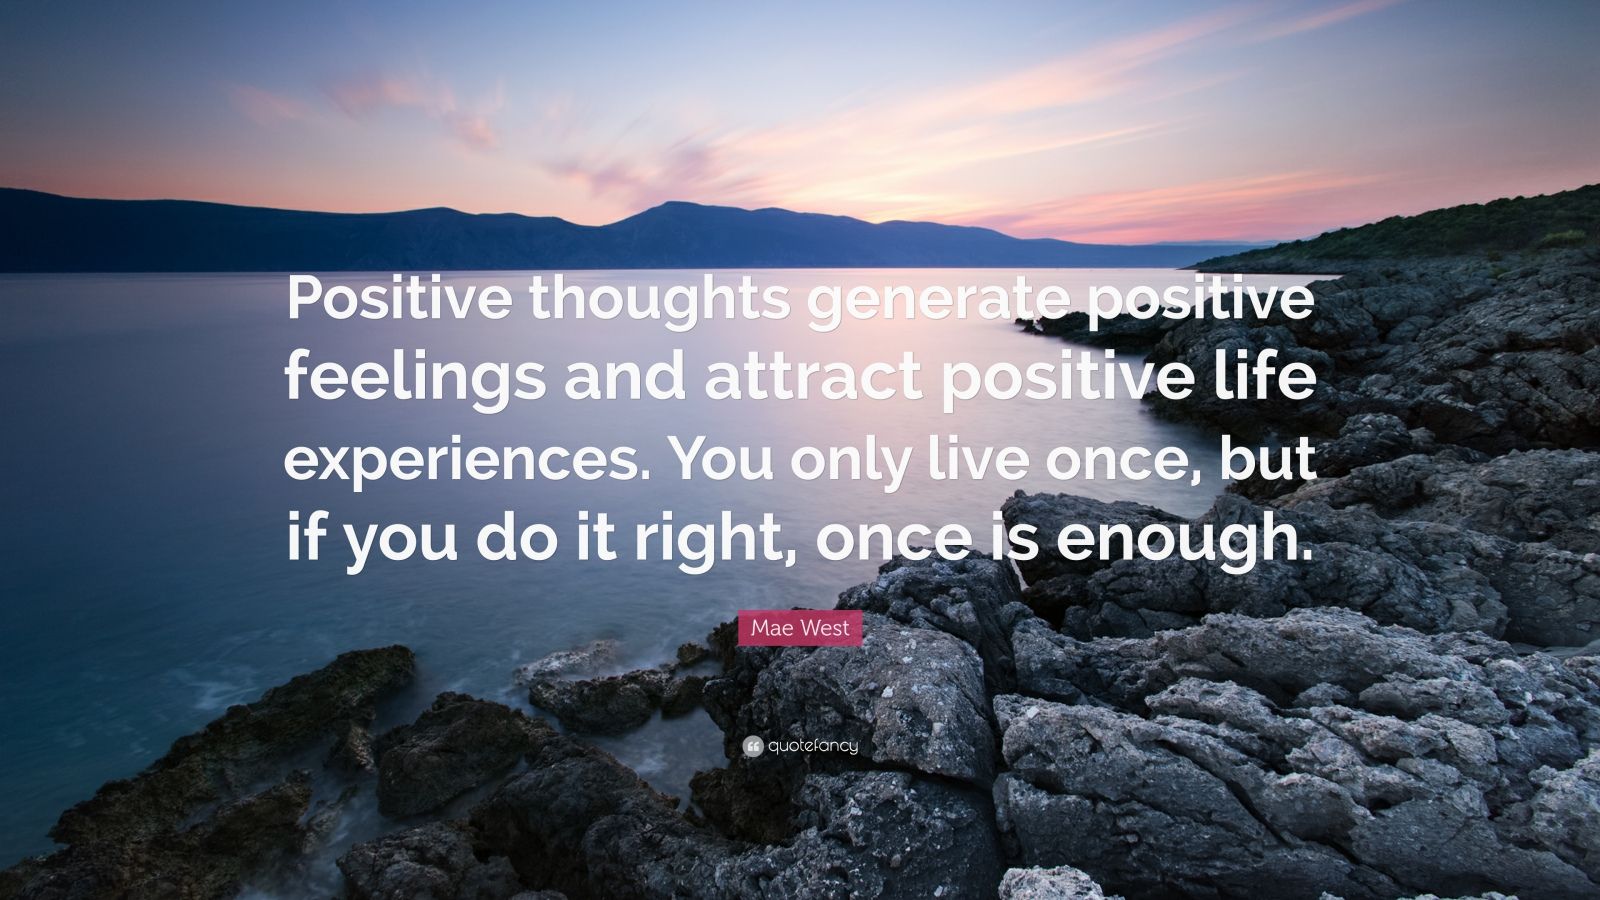 Mae West Quote: “Positive thoughts generate positive feelings and